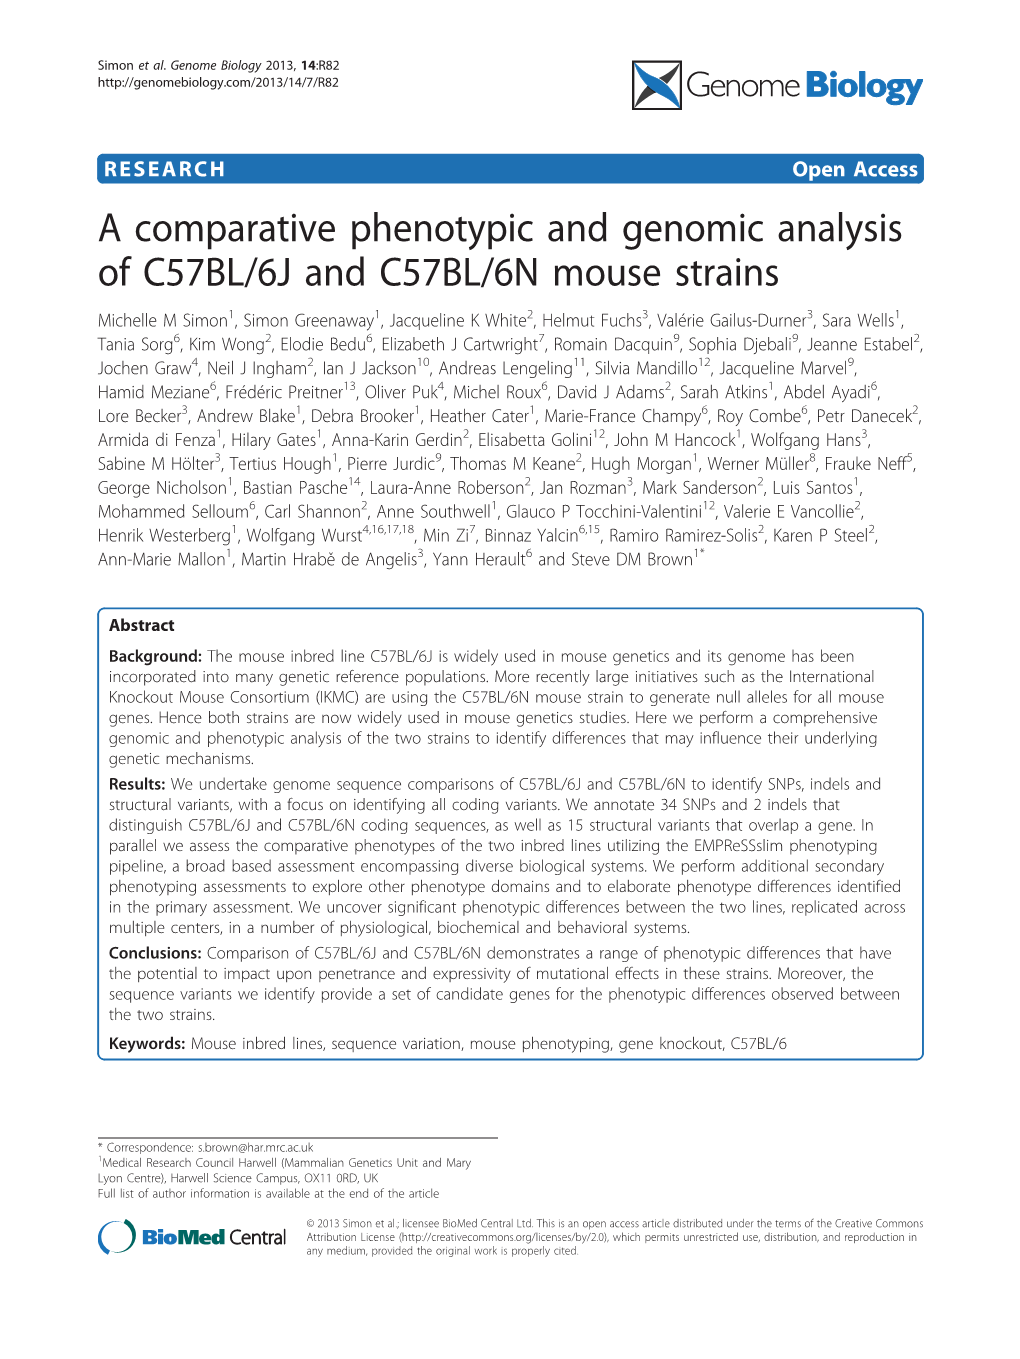 A Comparative Phenotypic and Genomic Analysis of C57BL/6J And